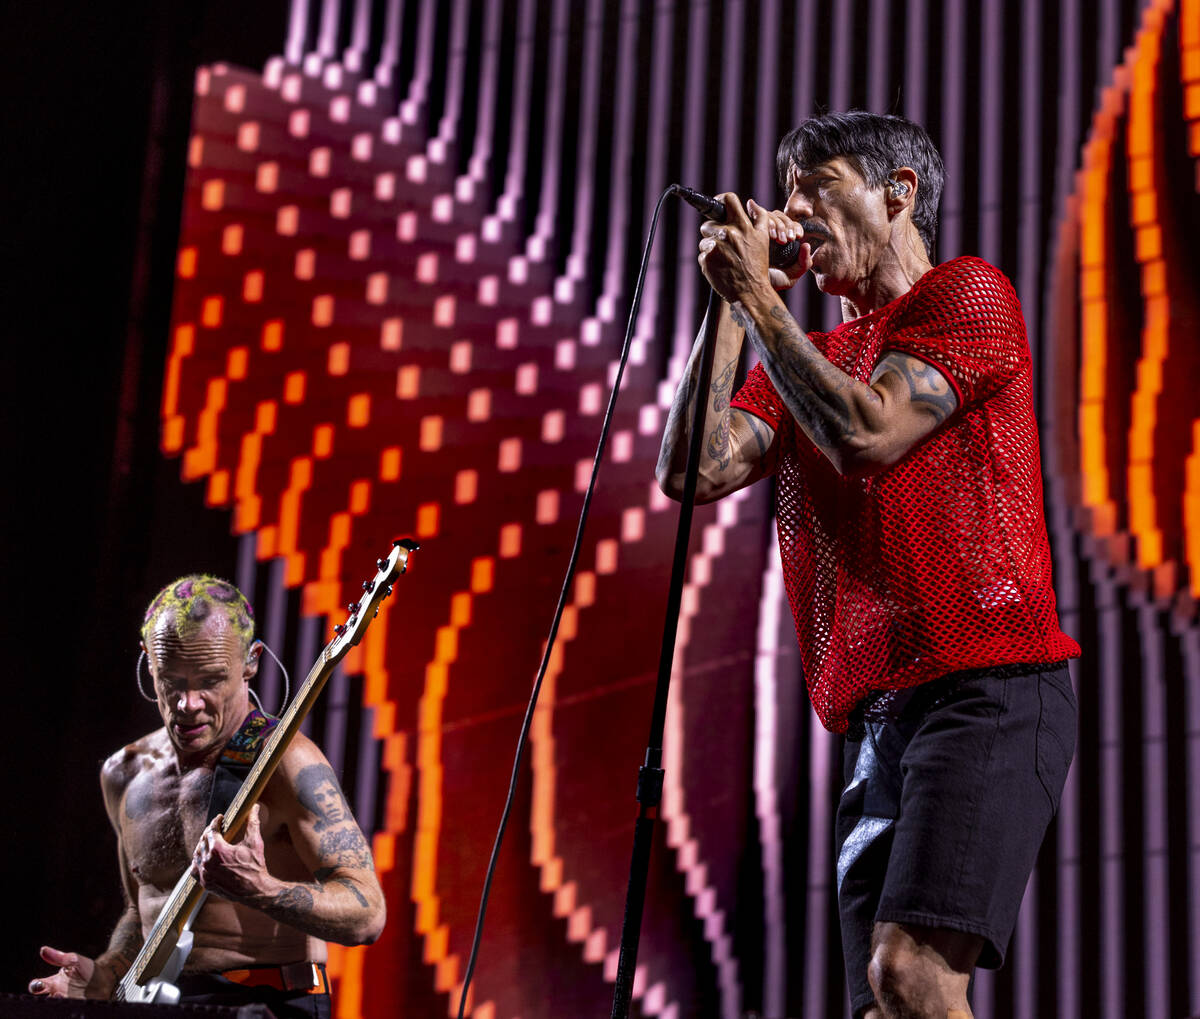 (From left) Bassist Flea plays as Lead singer Anthony Kiedis sings with The Red Hot Chili Peppe ...